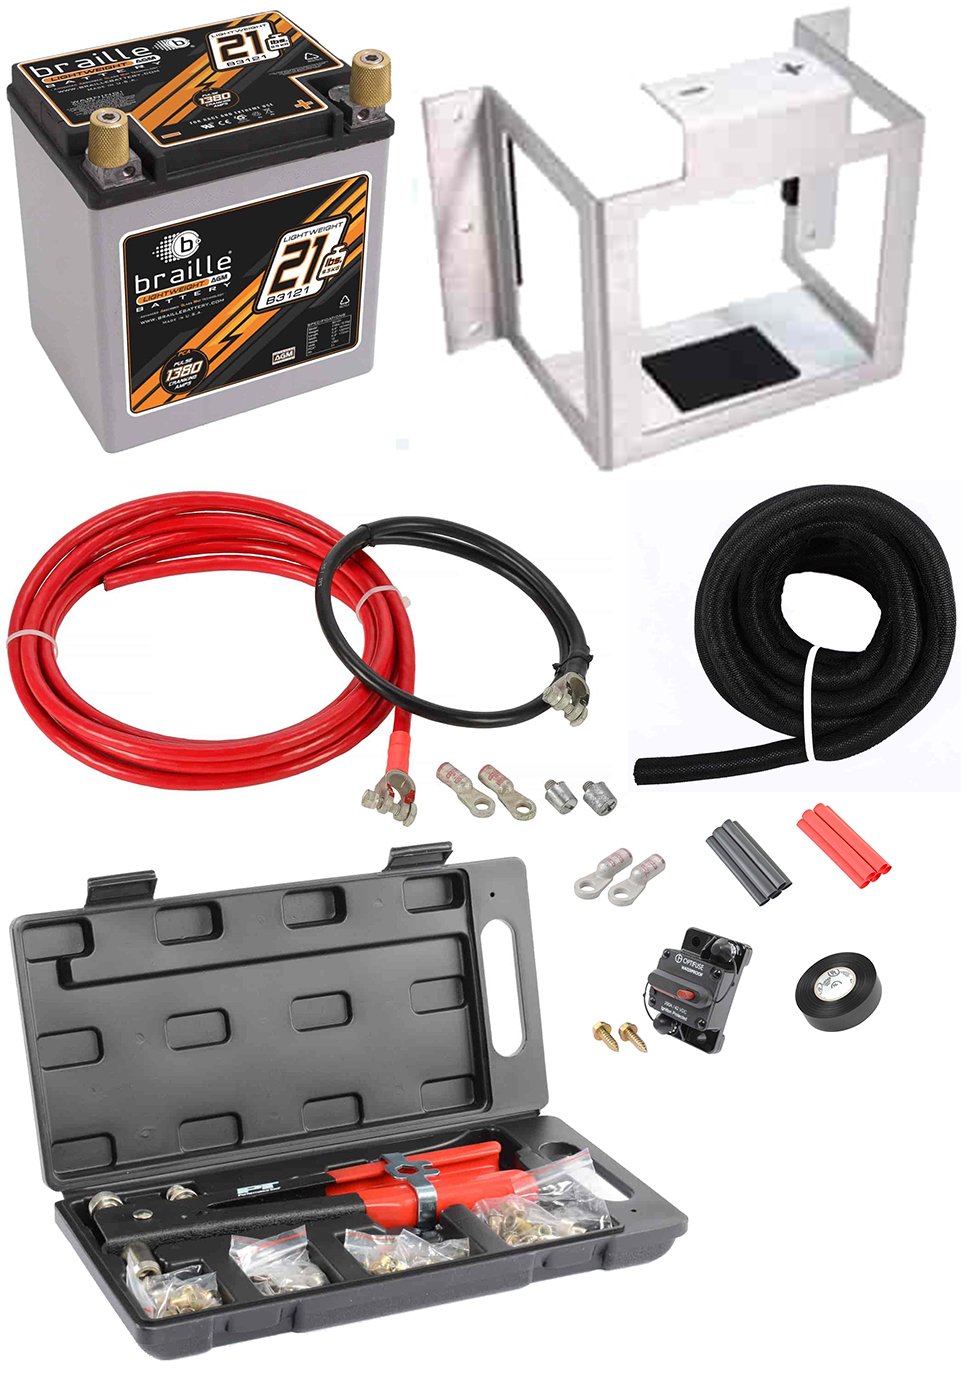 Advanced AGM Lightweight Racing Battery Relocation Kit